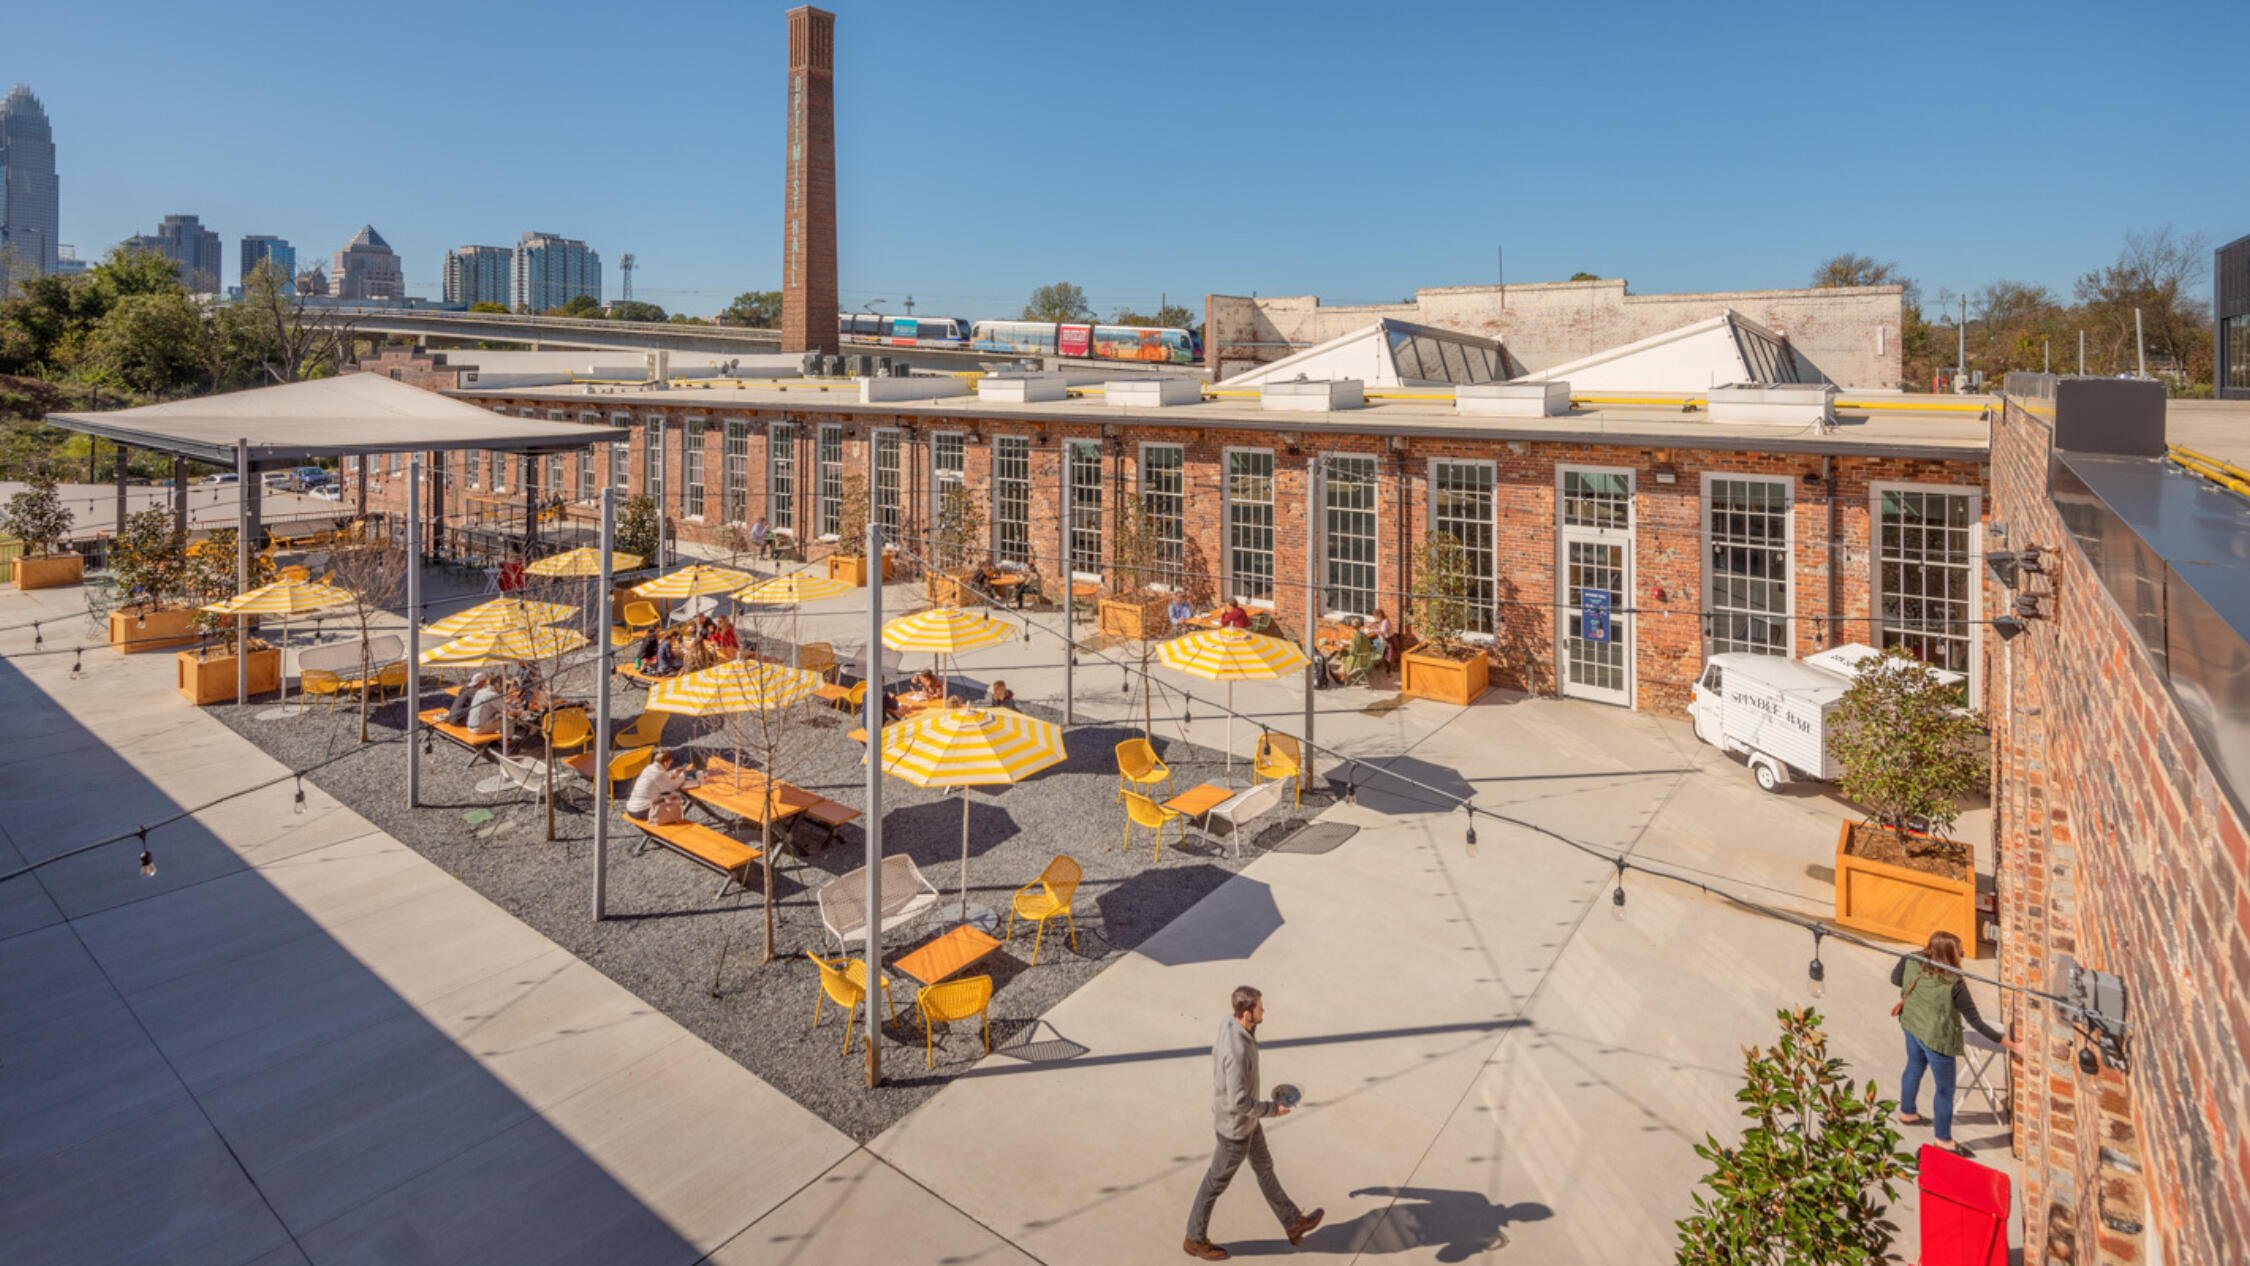 Optimist Hall outdoor courtyard with tables and chairs under umbrellas and skyline in background